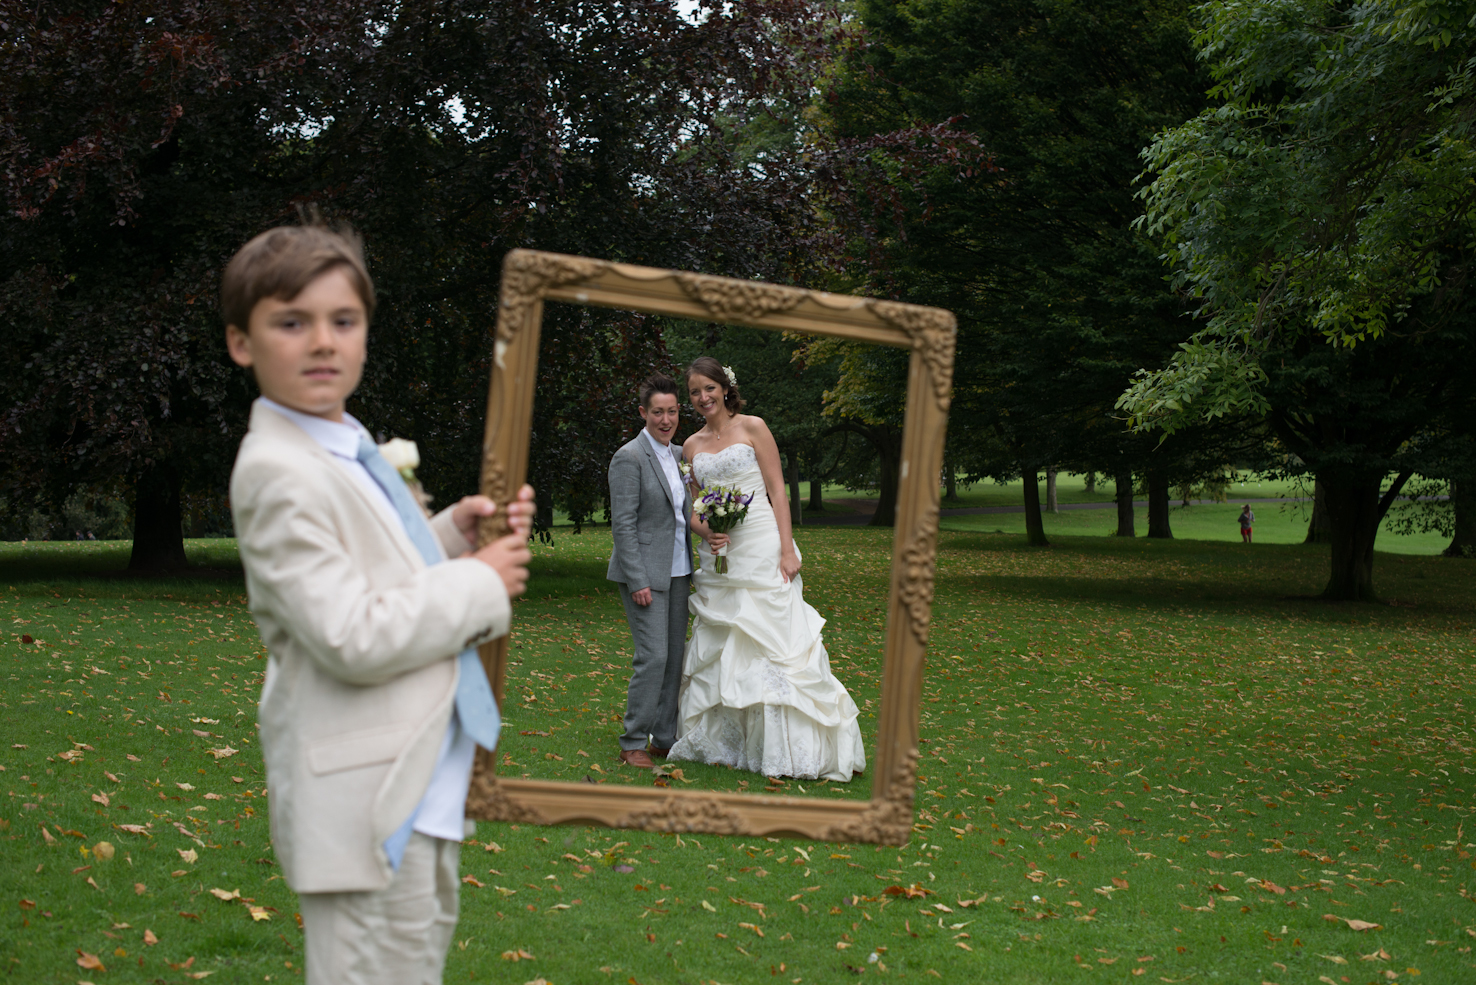 Roundhay Park providing a picture perfect backdrop for wedding photographs